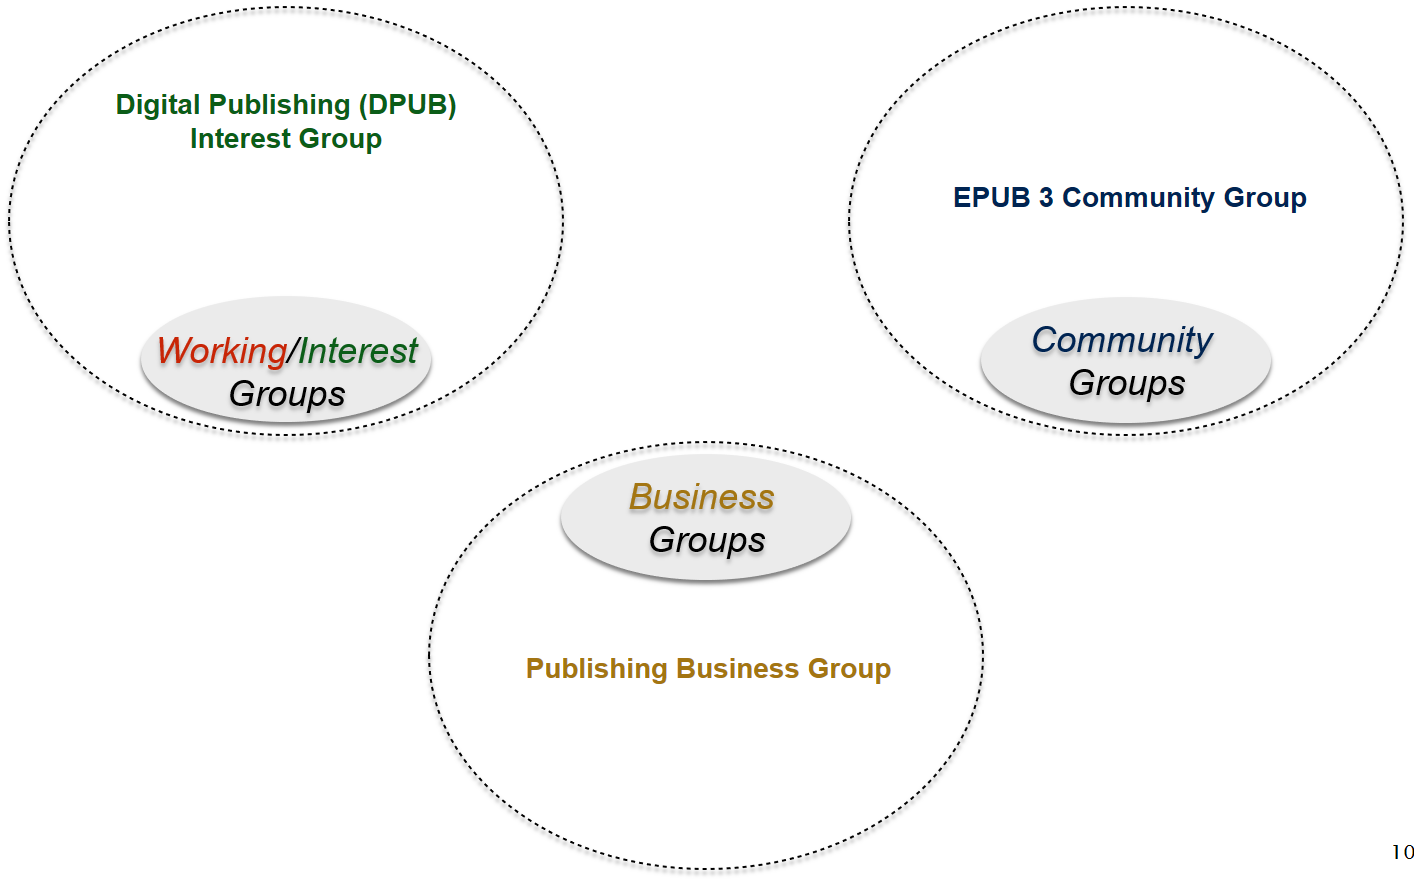 Just the groups within publishing